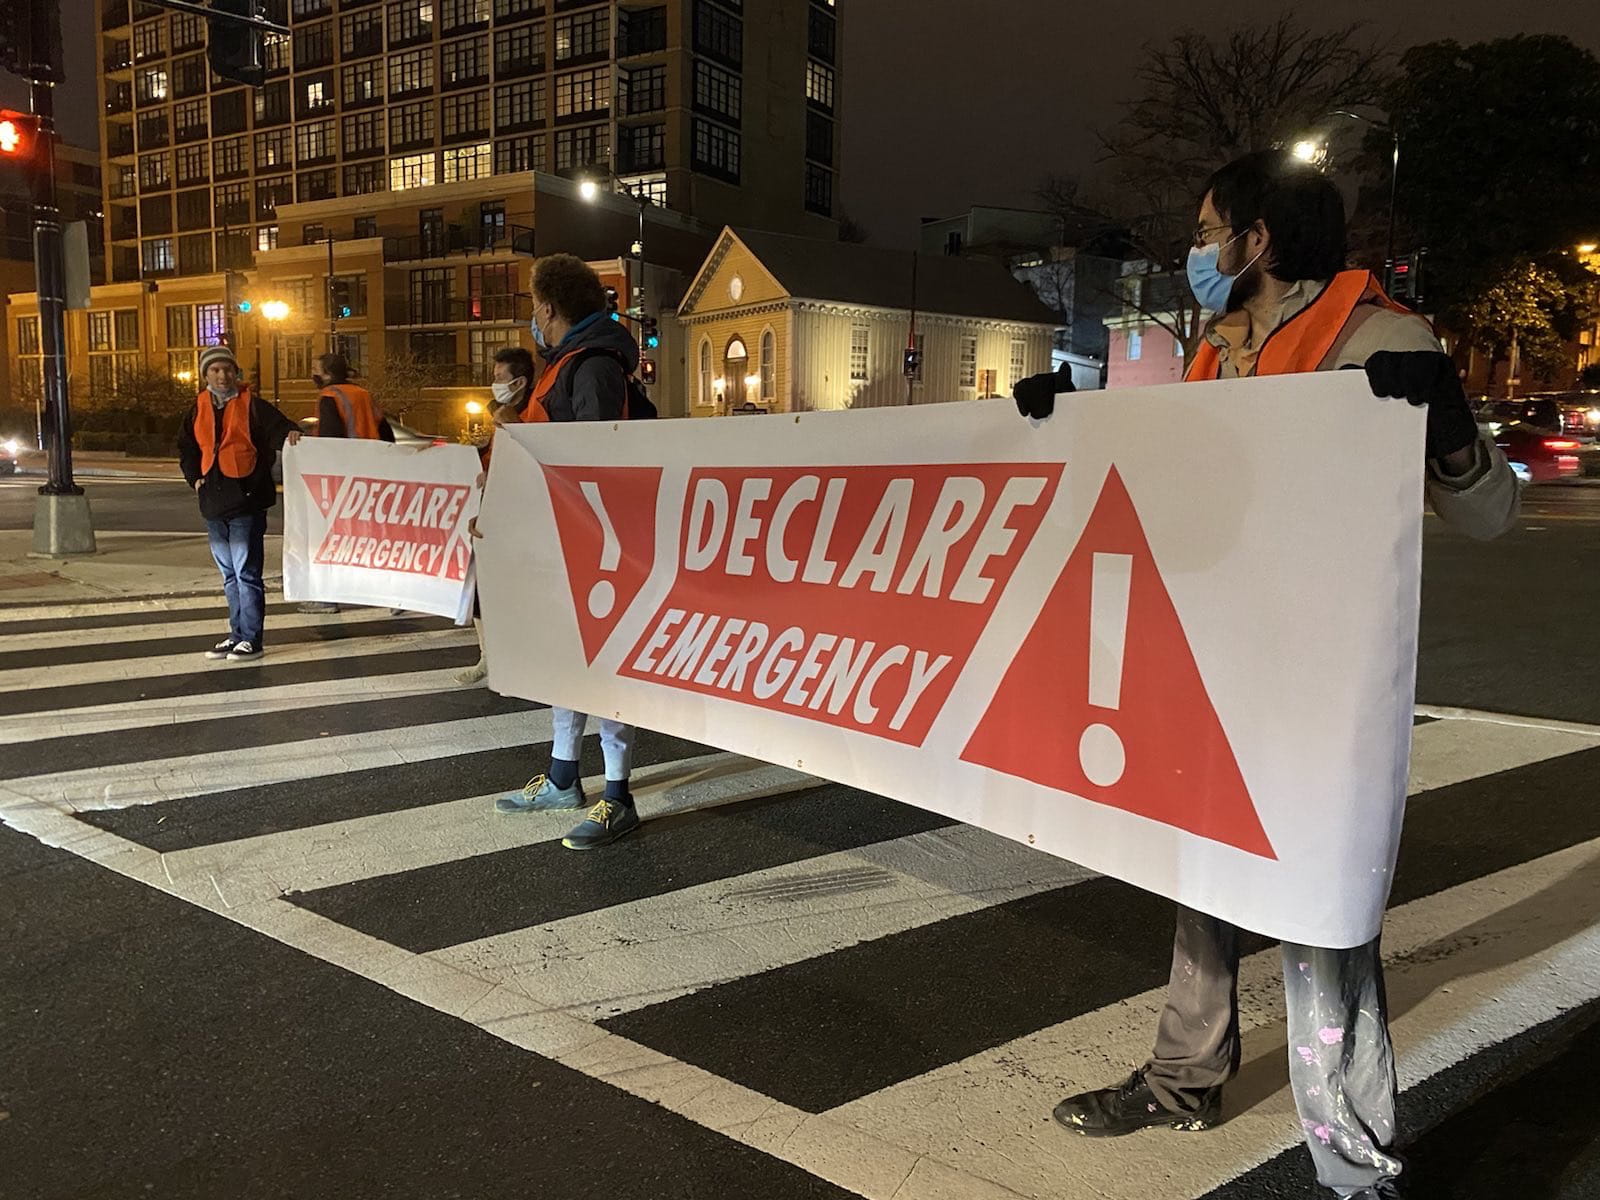 Five young protestors hold declare emergency banners across a road on what looks like a cold Washington DC night